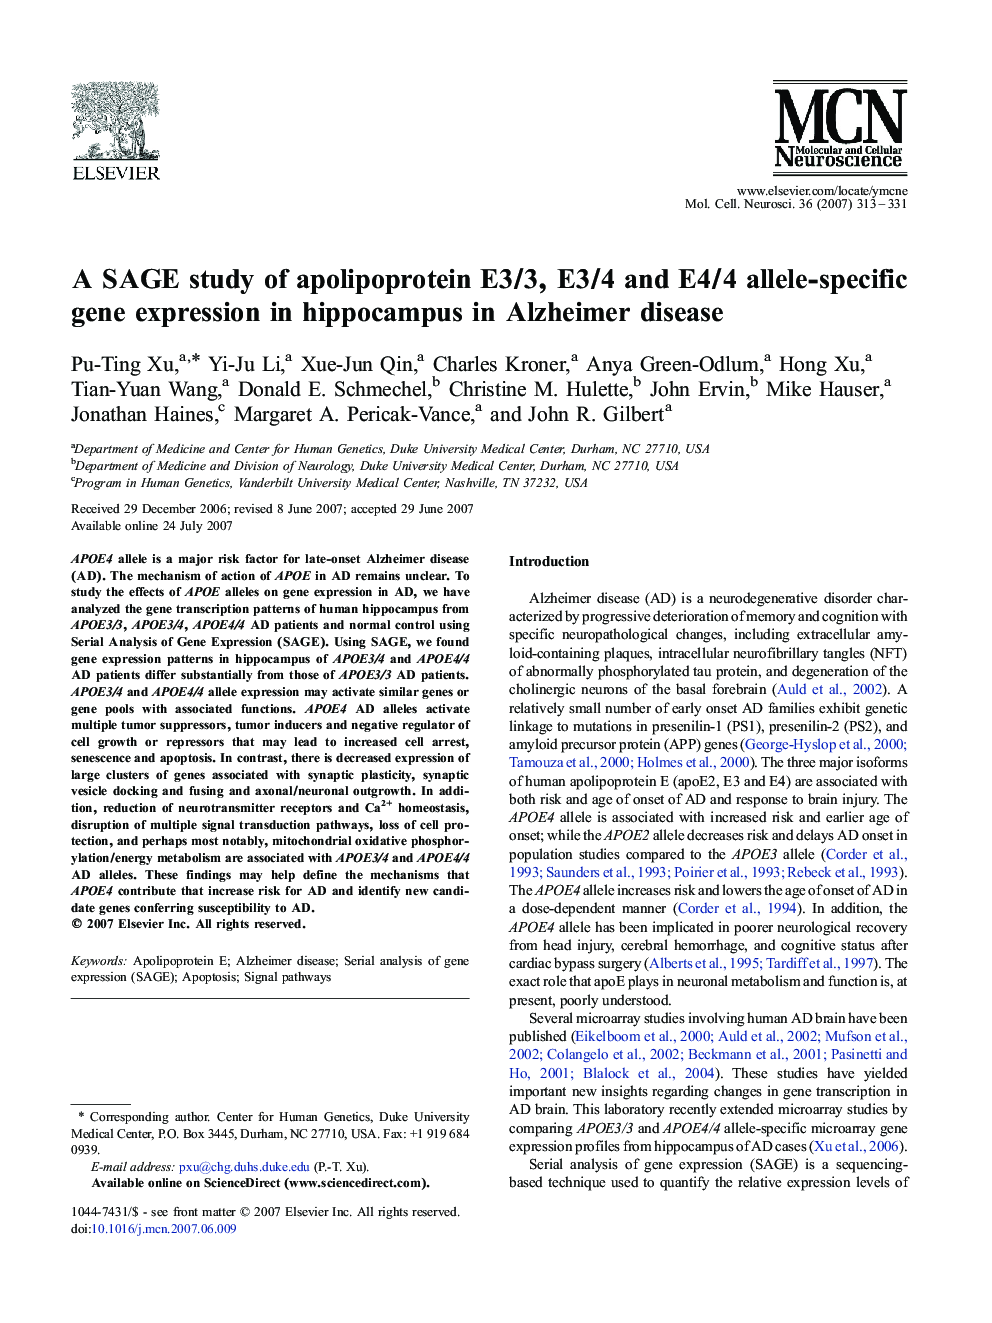 A SAGE study of apolipoprotein E3/3, E3/4 and E4/4 allele-specific gene expression in hippocampus in Alzheimer disease